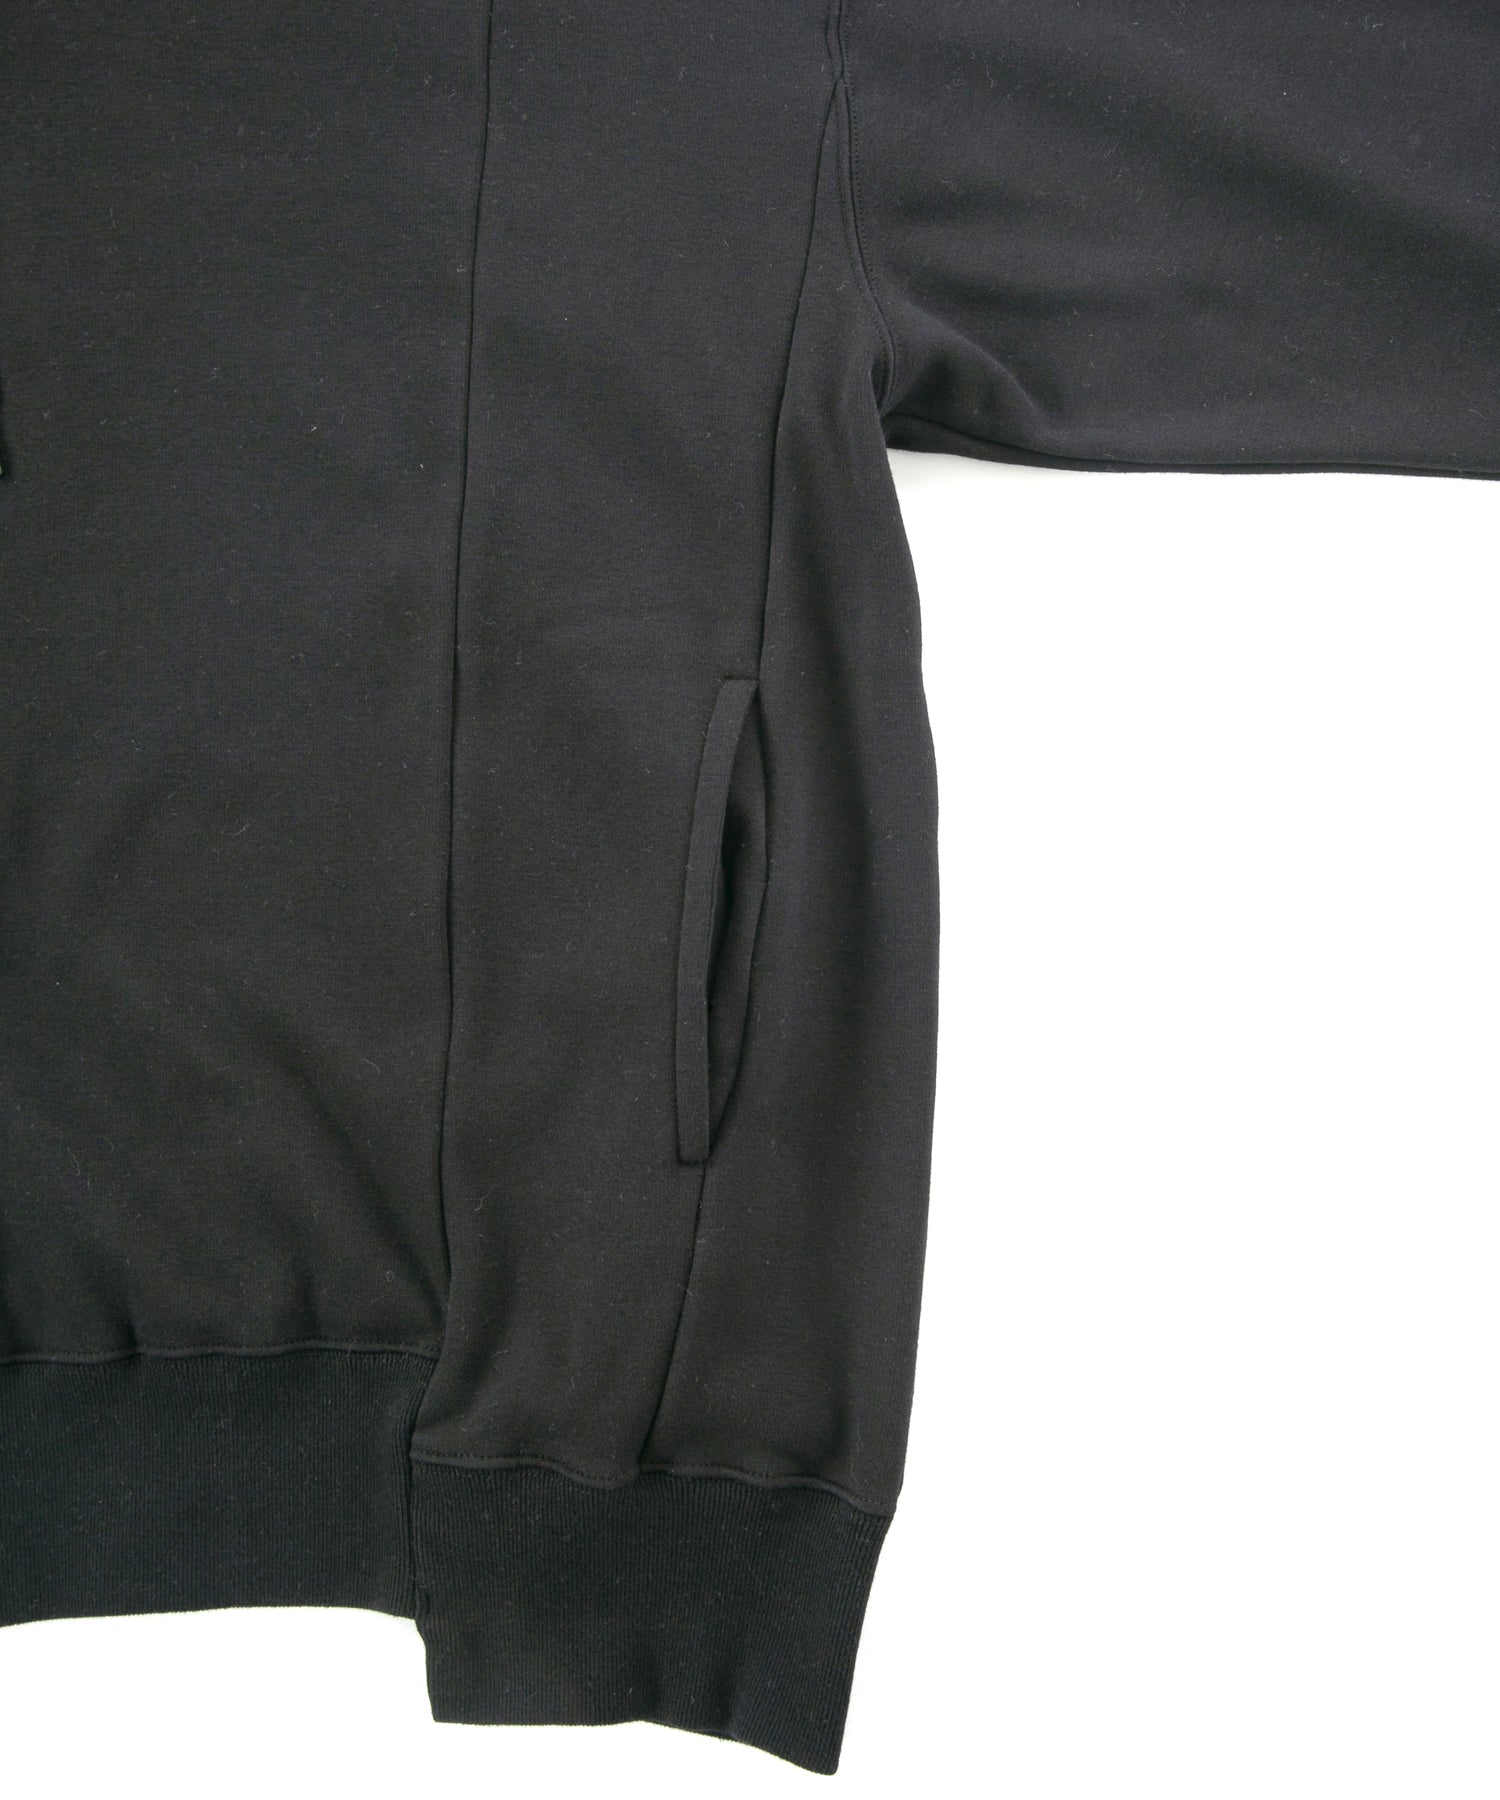 Load image into Gallery viewer, Stretch Cotton Polyester Knit Backside Velor finish High neck Hoodie - BLACK